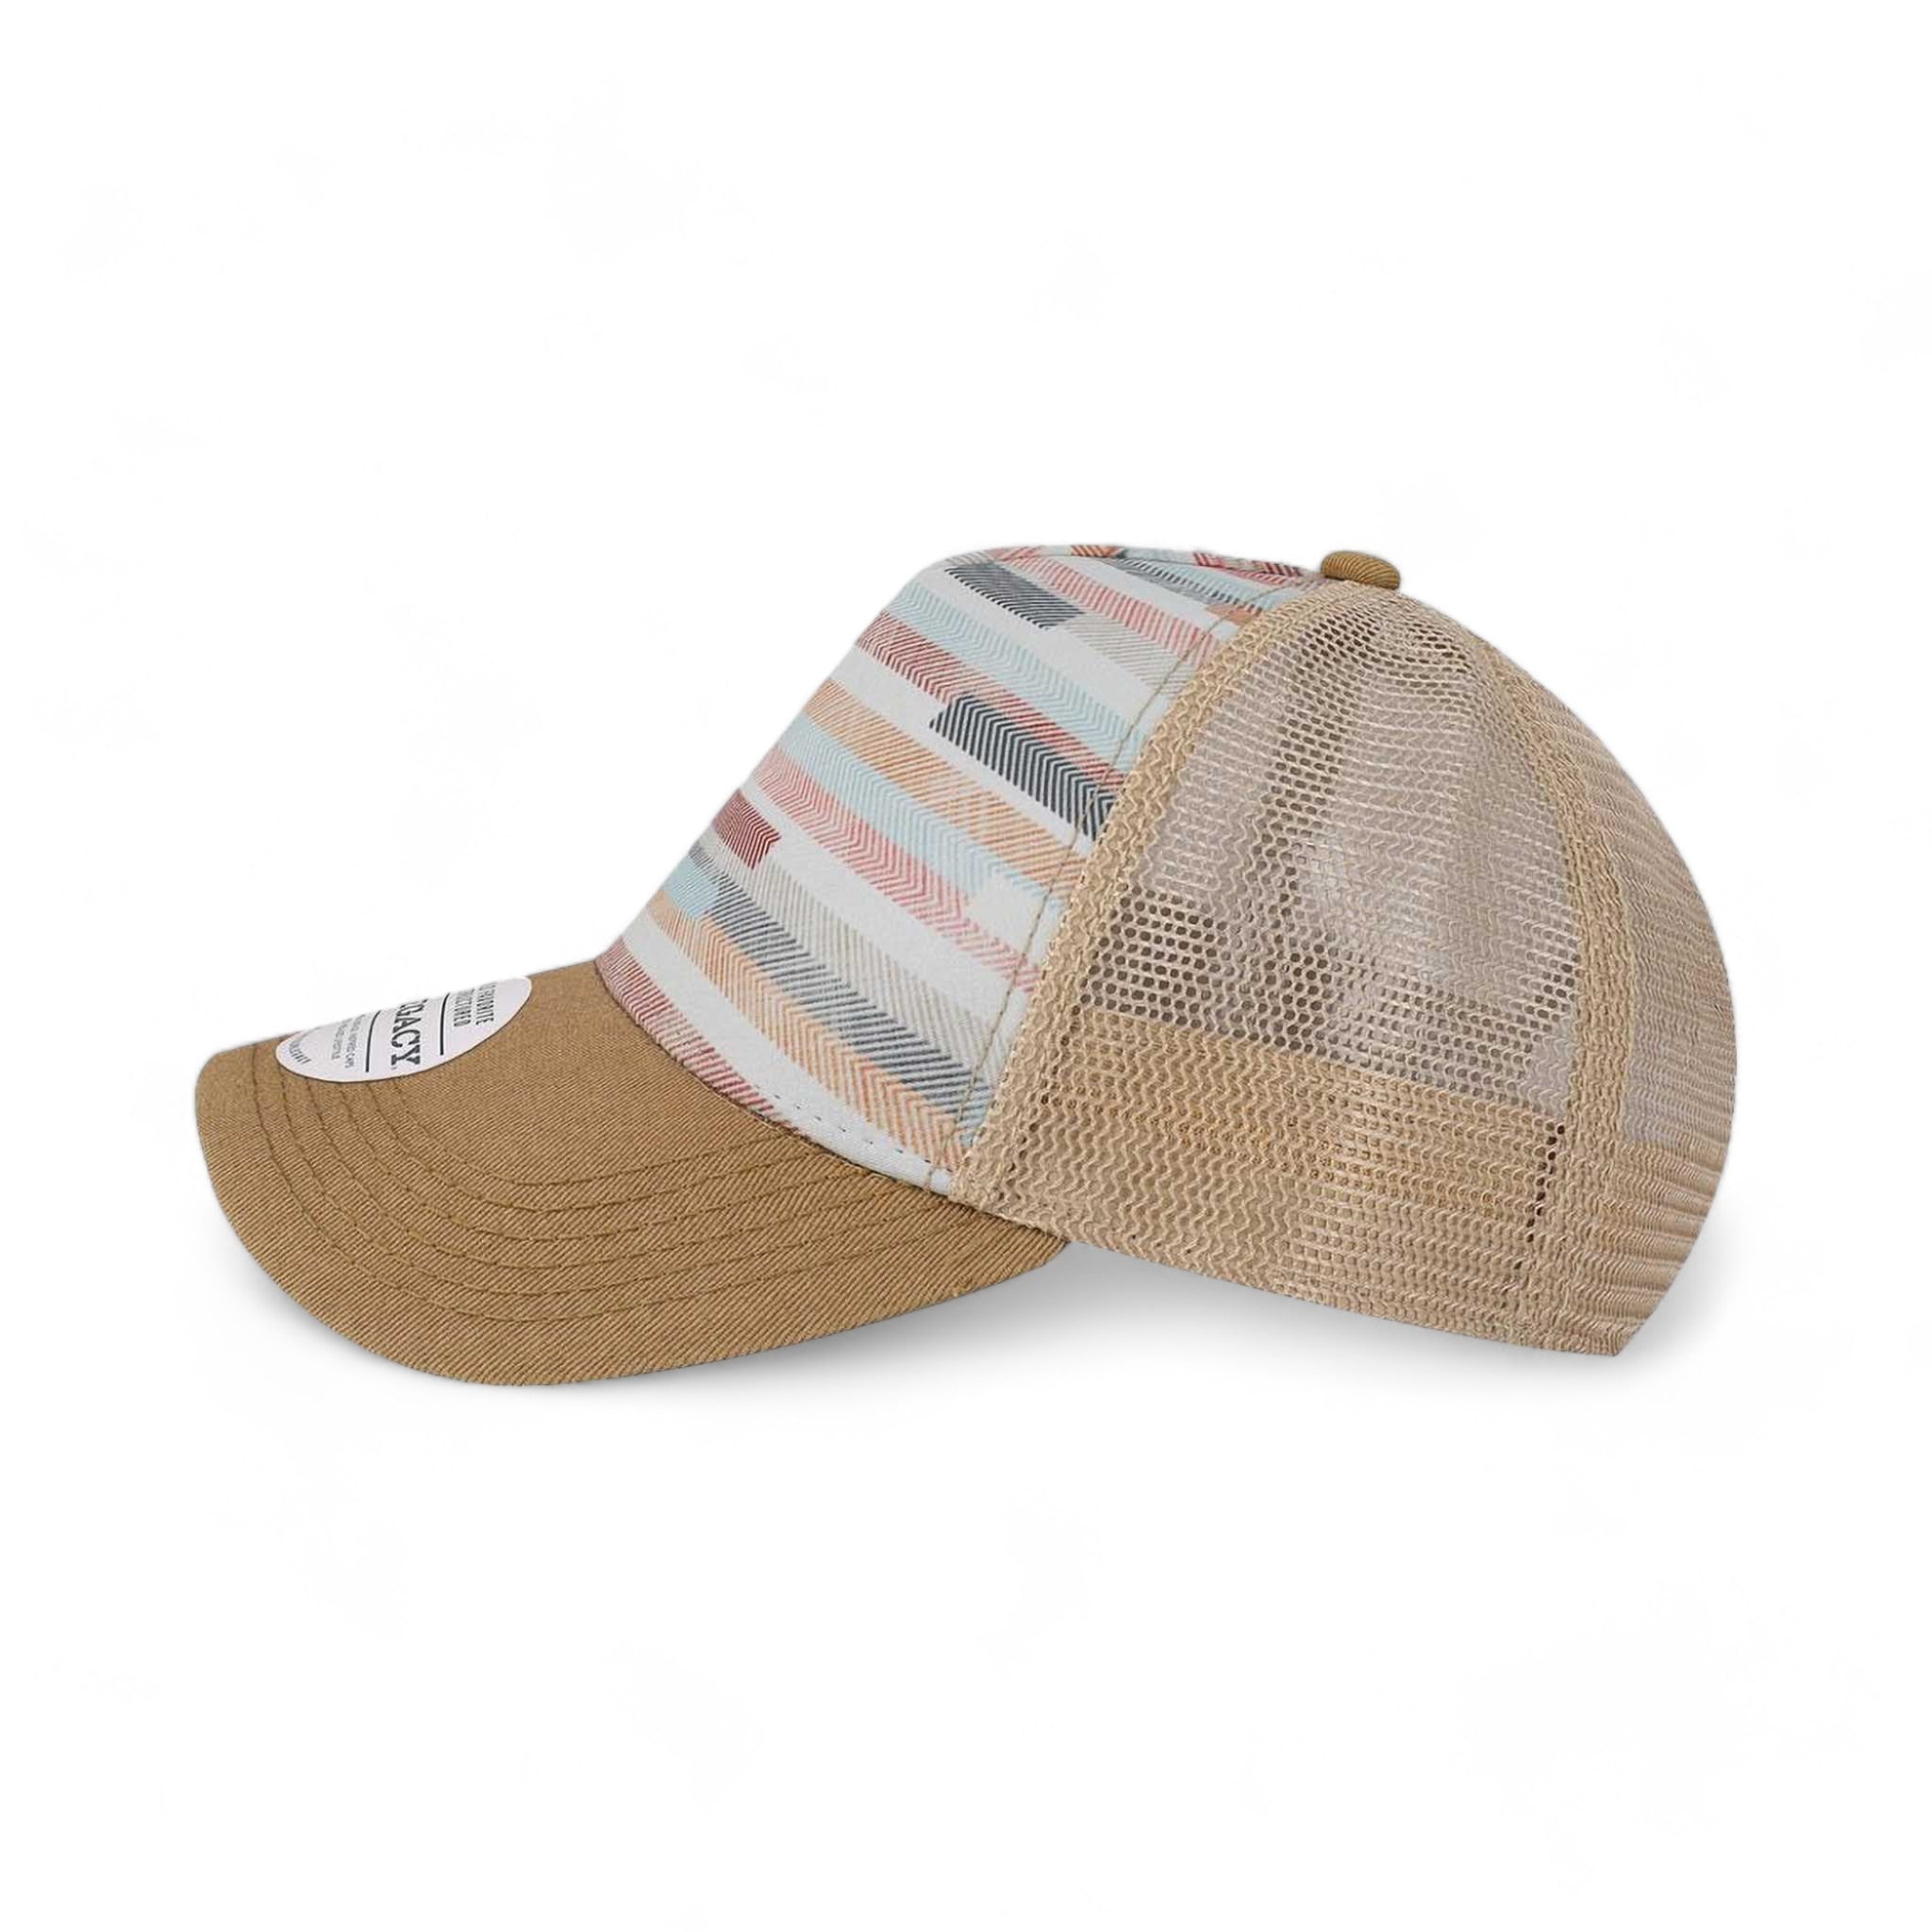 Side view of LEGACY OFAFP custom hat in fabric stripes